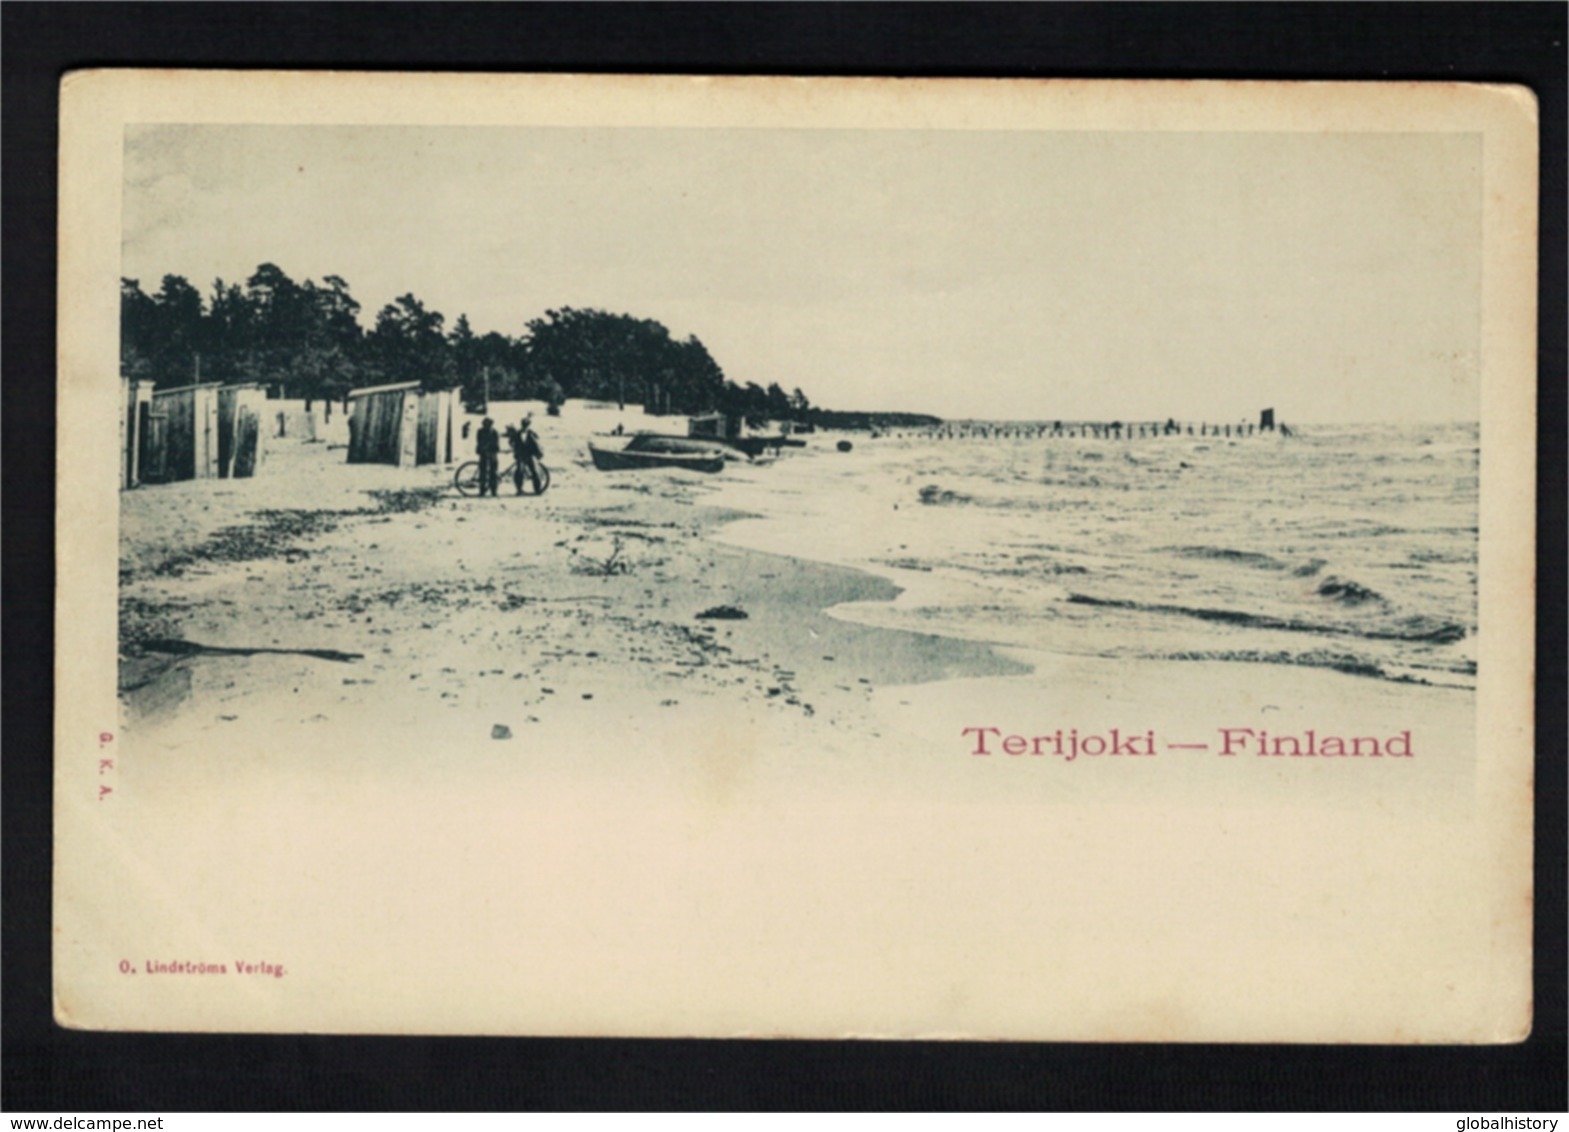 DE1248 - FINLAND - TERIJOKI - VIEW ON THE BEACH AND WOODEN CABINS - Finnland